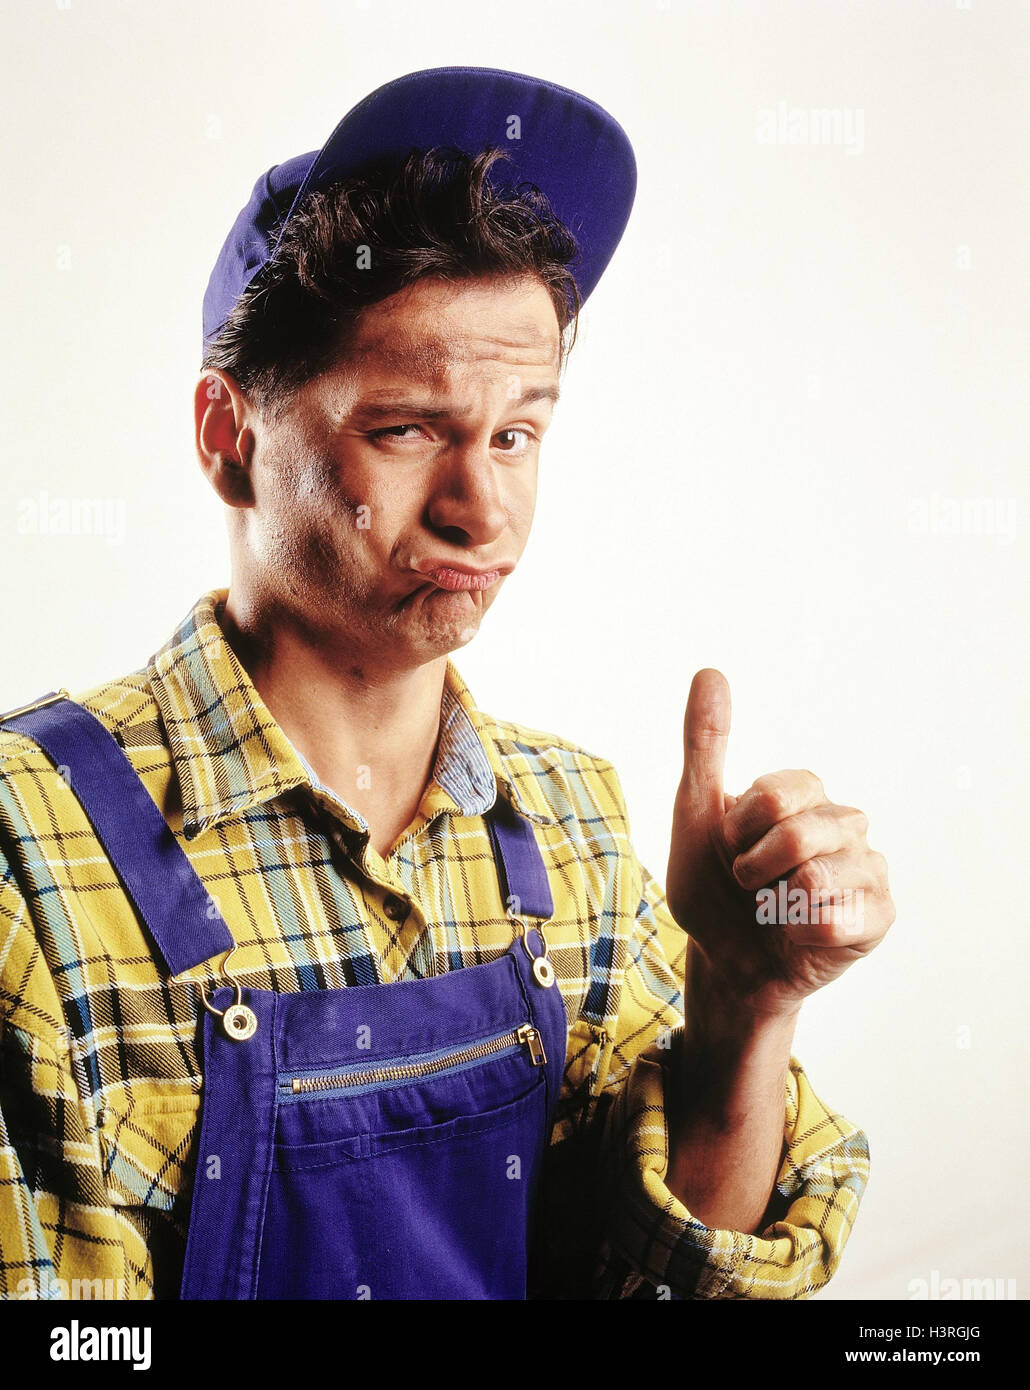 Man, craftsman, gesture, pollex, high studio, cut out, overall, overalls, working clothes, shirt, yellow, checked, sign cap, contently Stock Photo